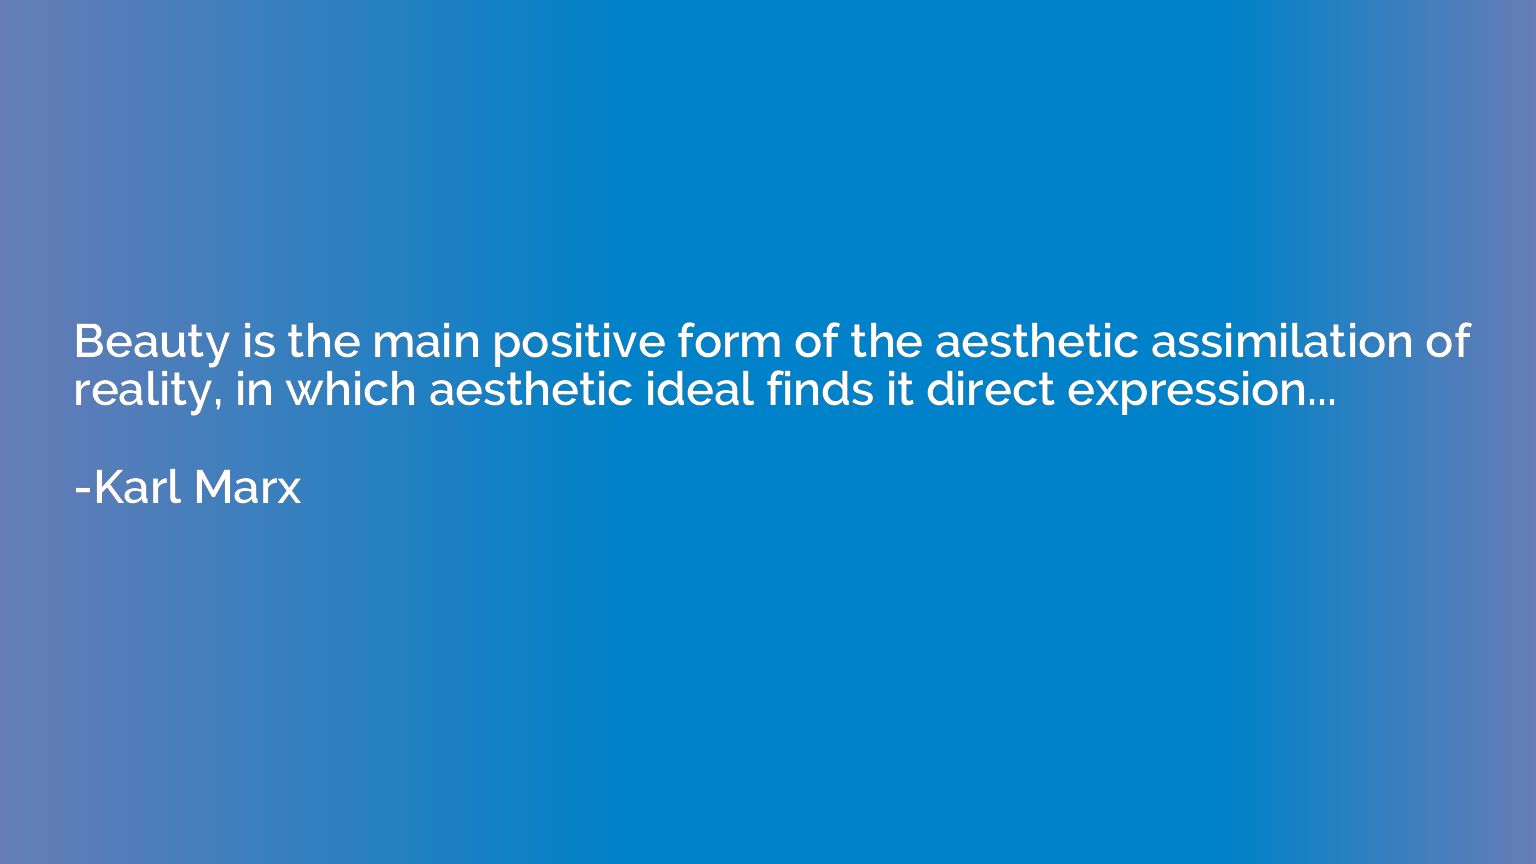 Beauty is the main positive form of the aesthetic assimilati